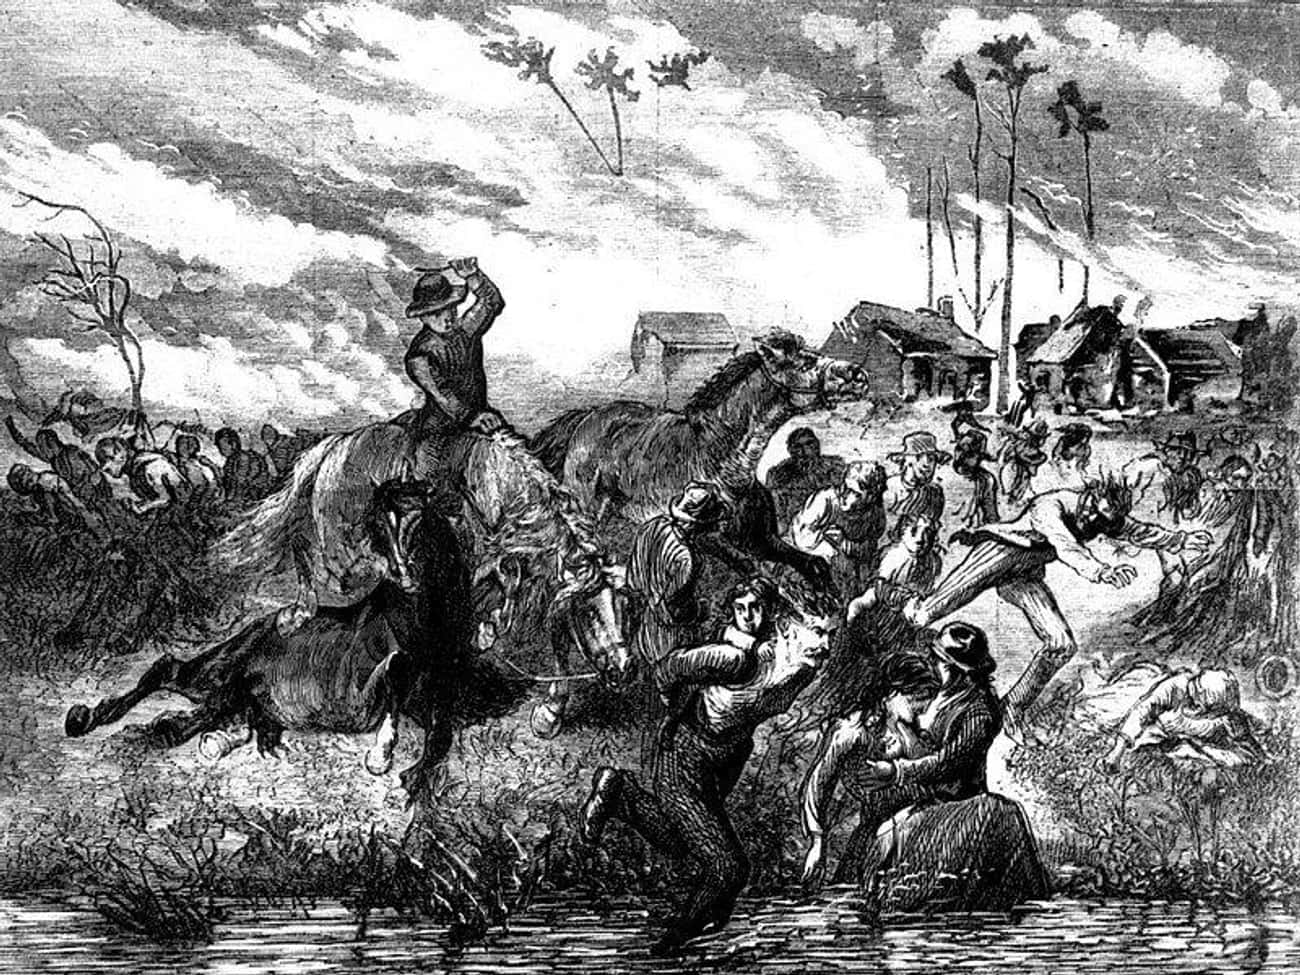 The Peshtigo Fire Took Place On The Same Day As The Great Chicago Fire And Was Far More Deadly